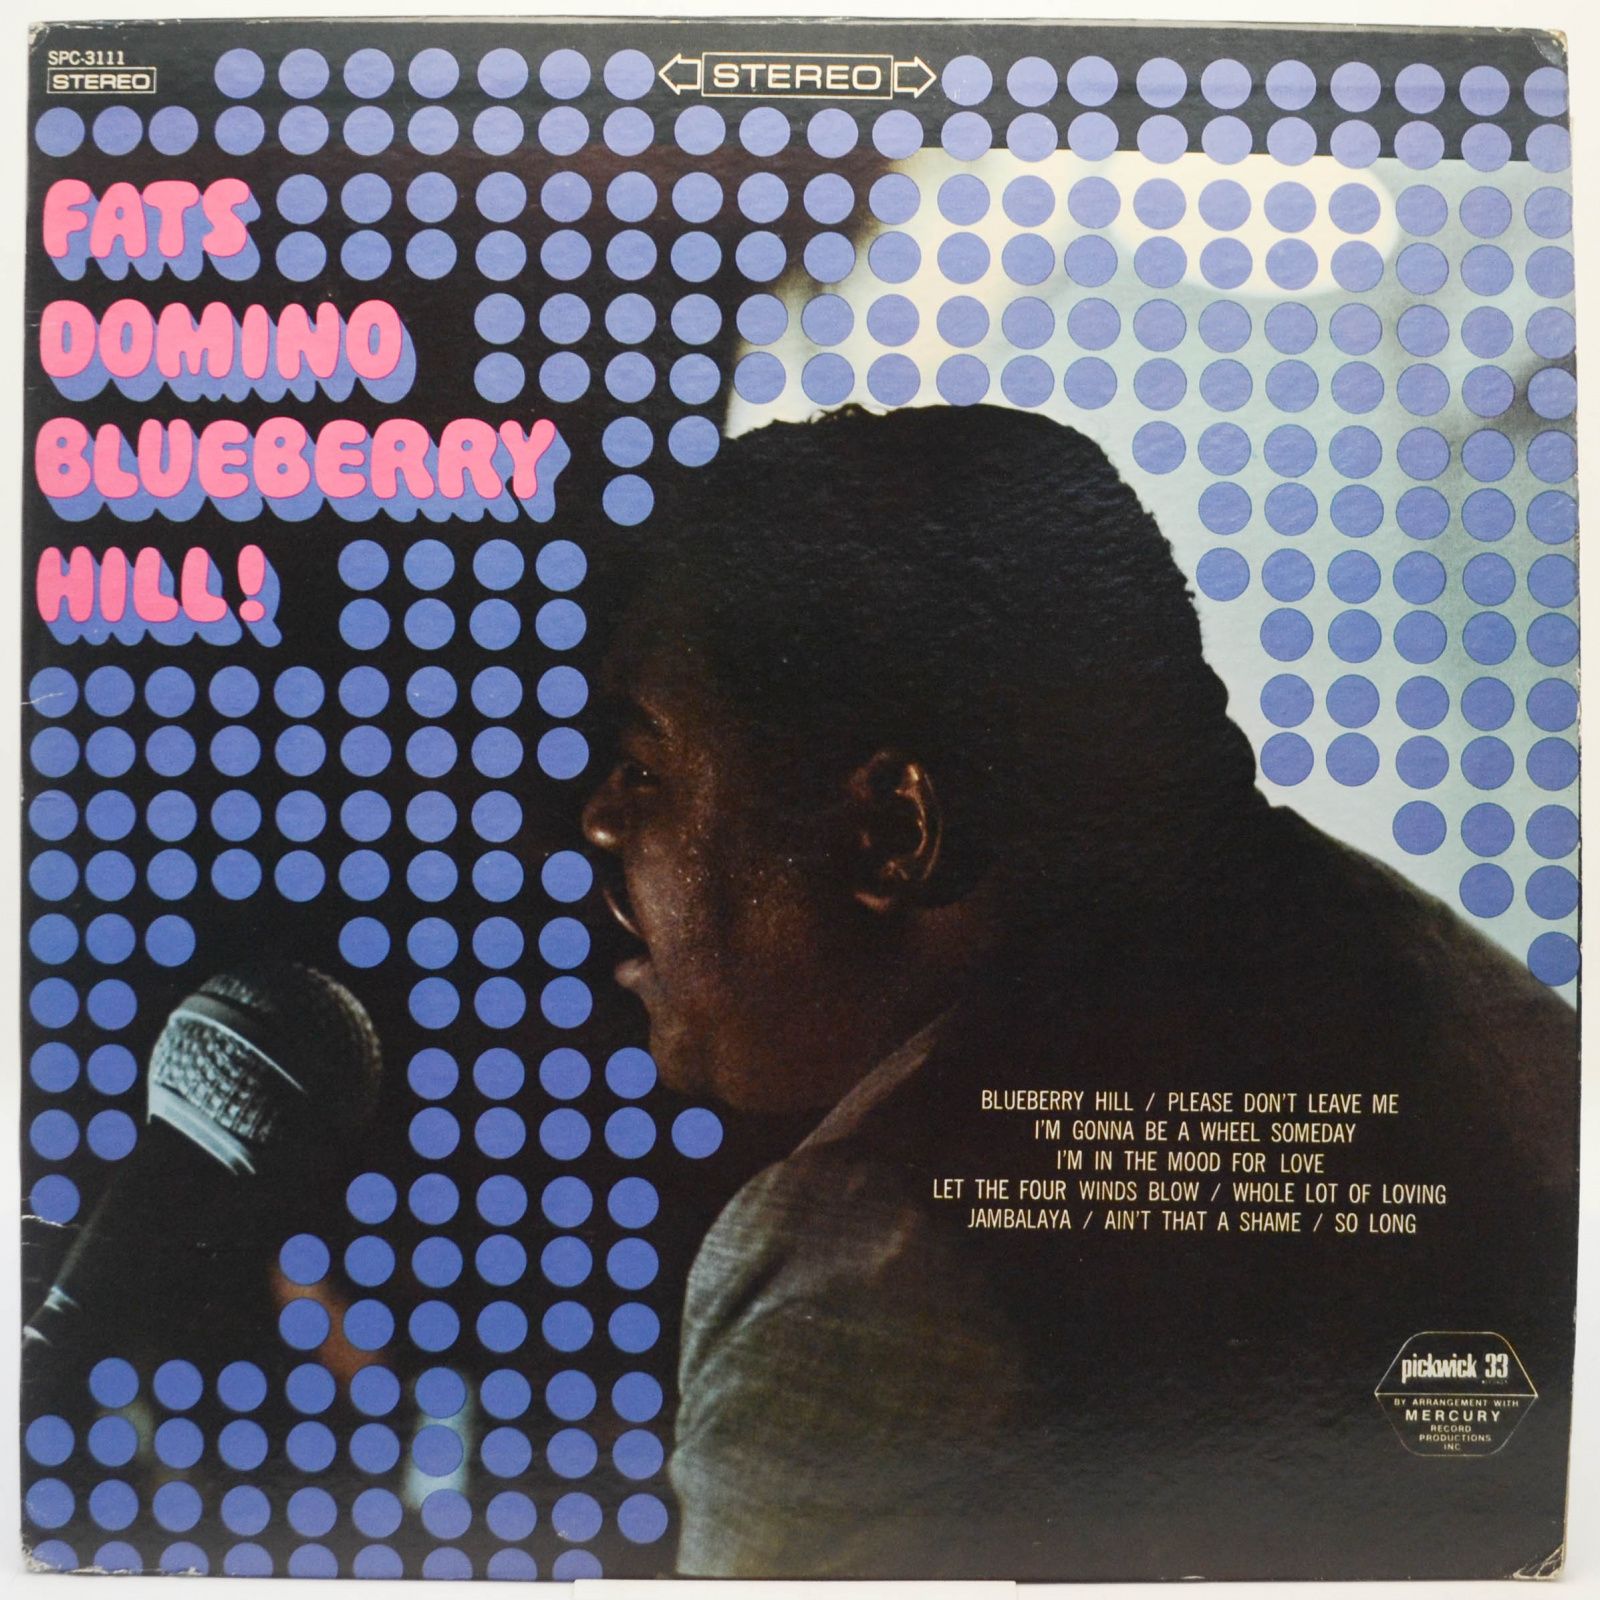 Fats Domino — Blueberry Hill, 1967